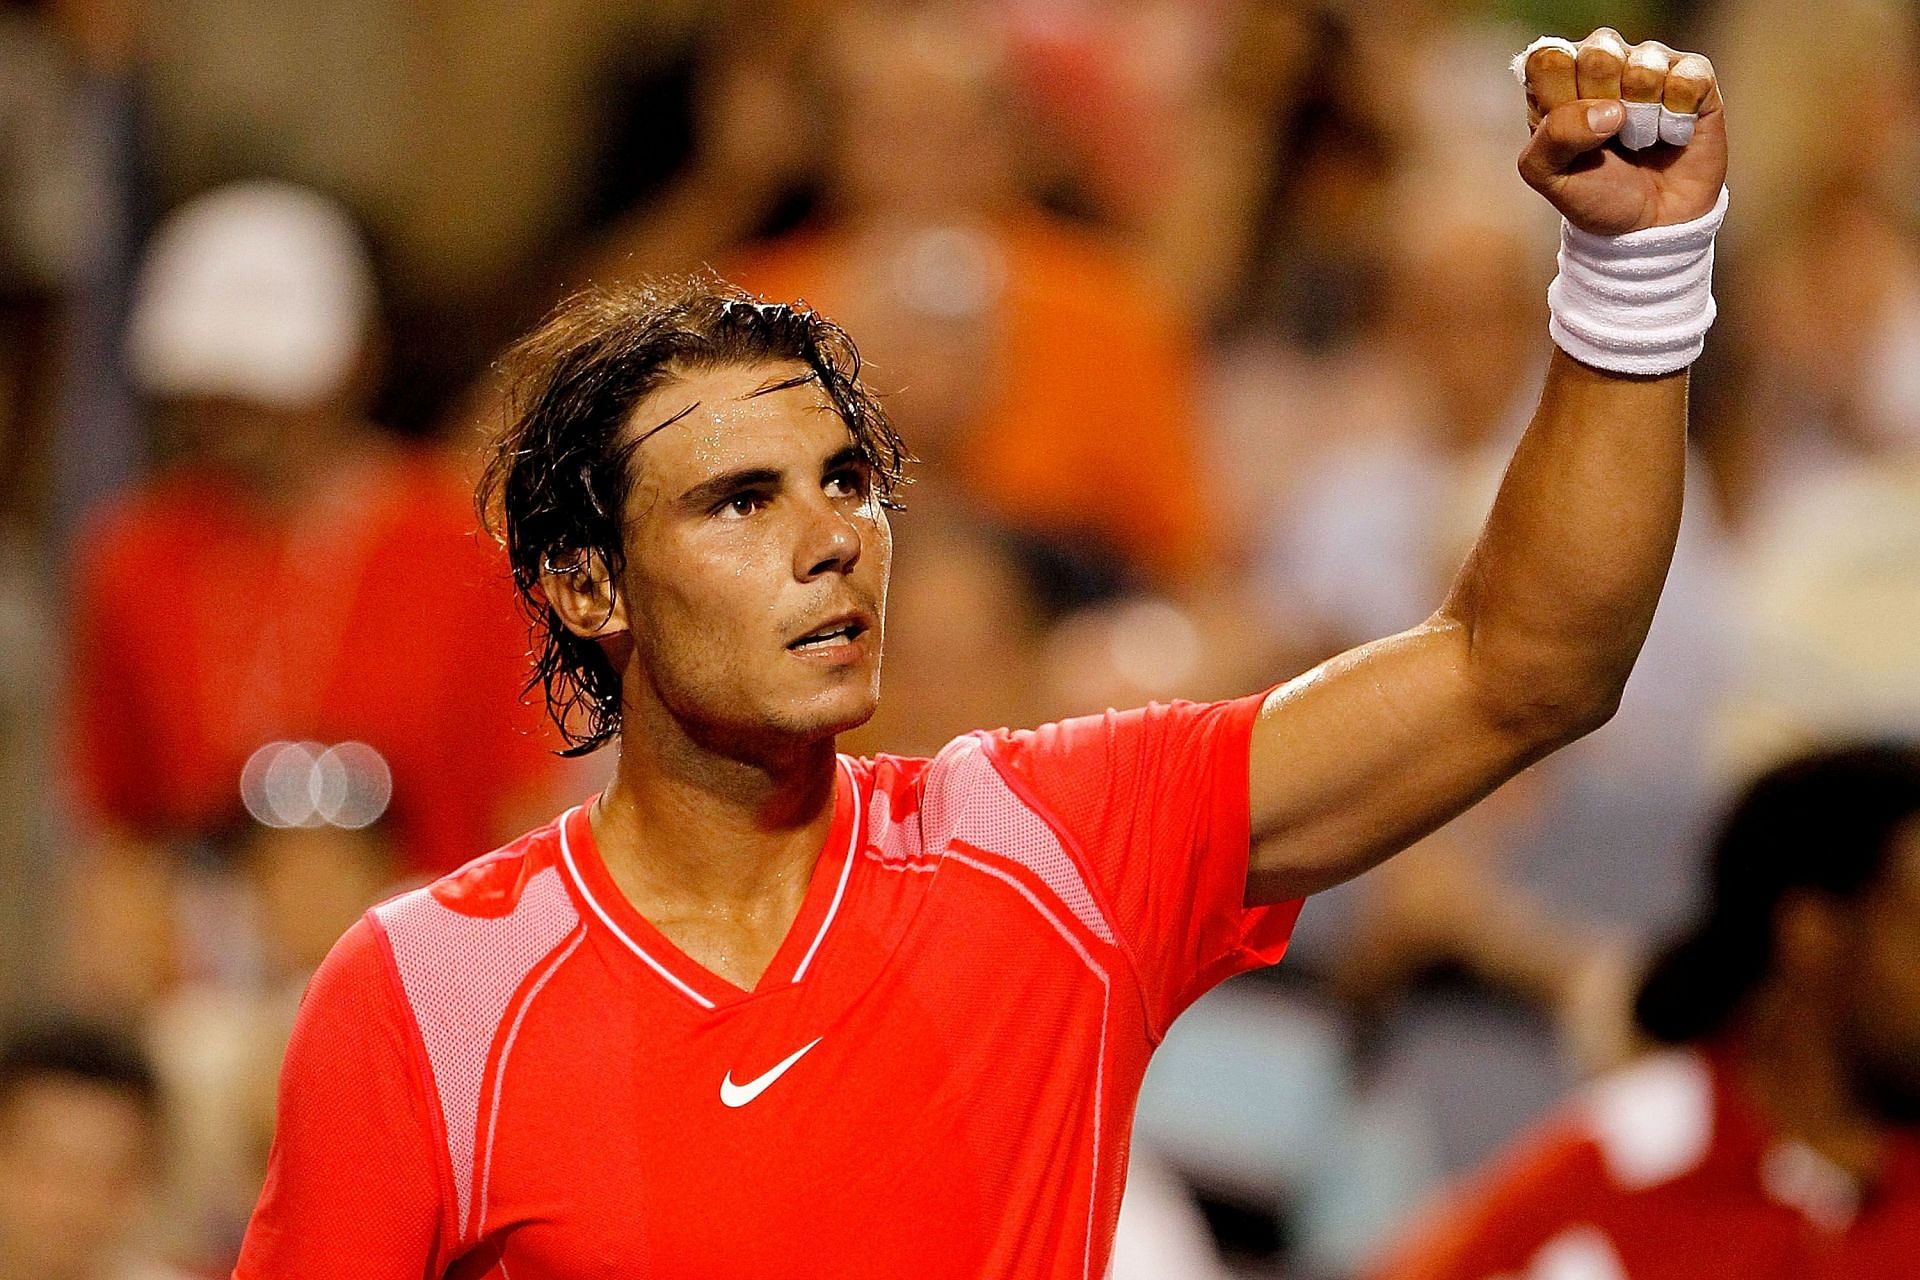 Rafael Nadal is recovering from an abdomen injury